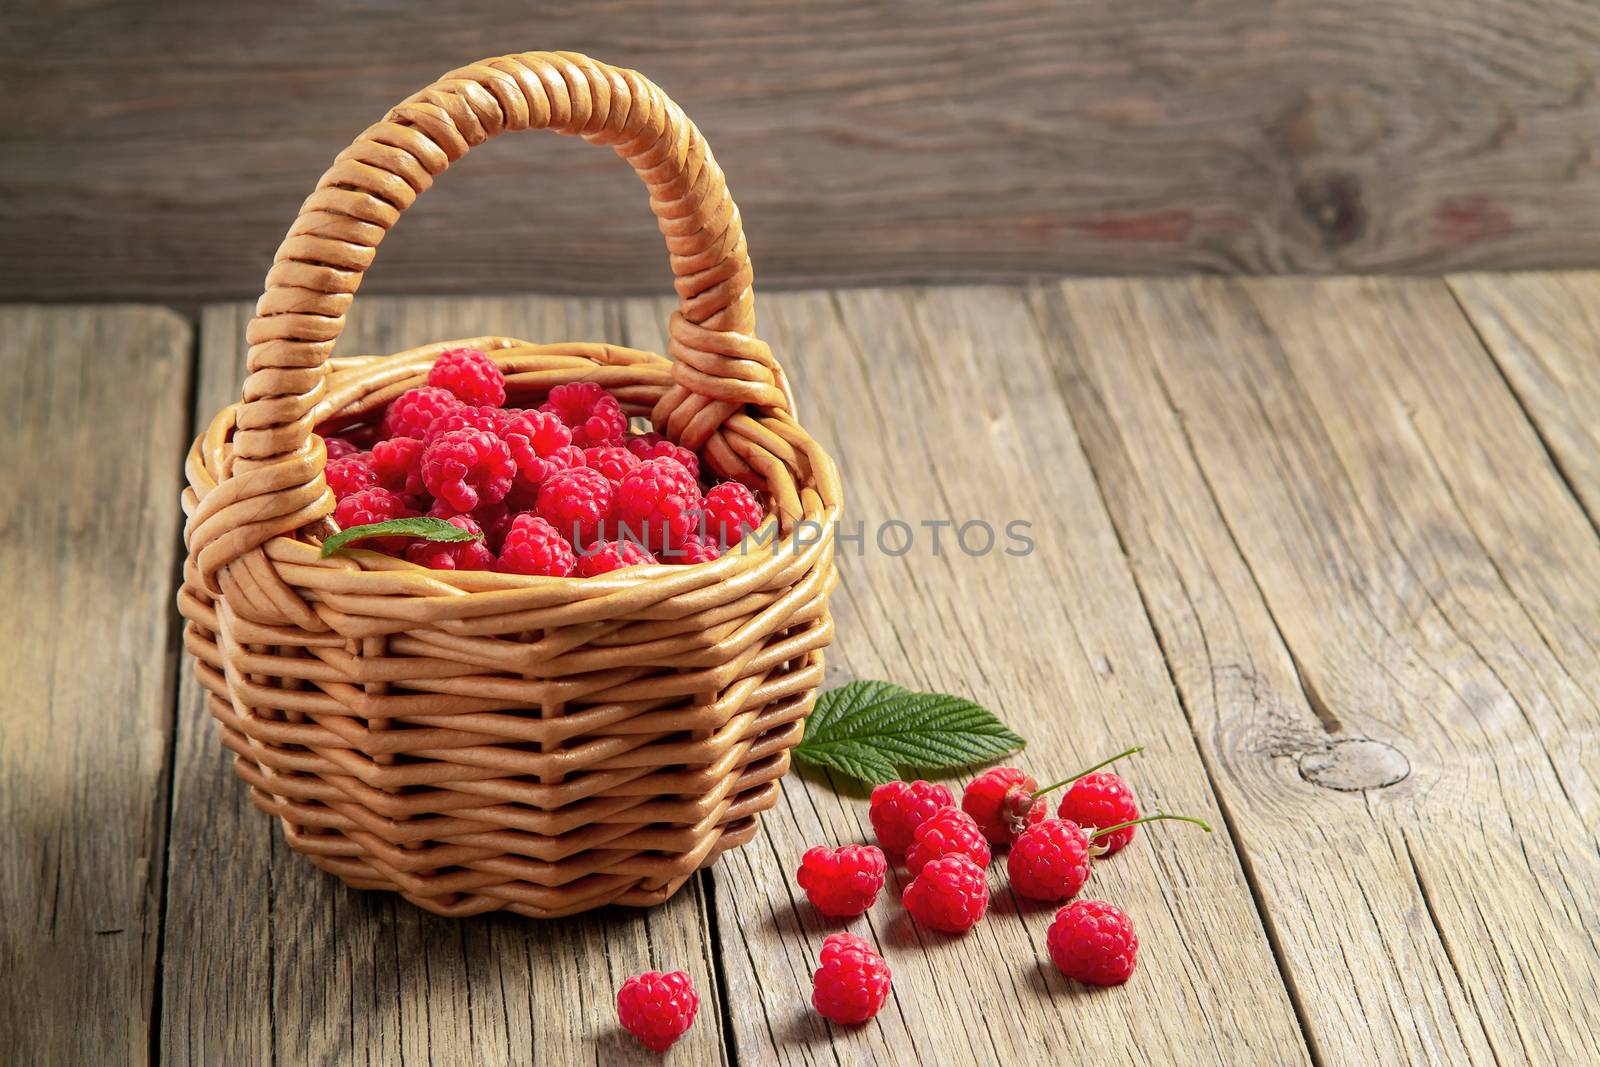 Ripe forest raspberries in a small basket on a wooden table, copy space.